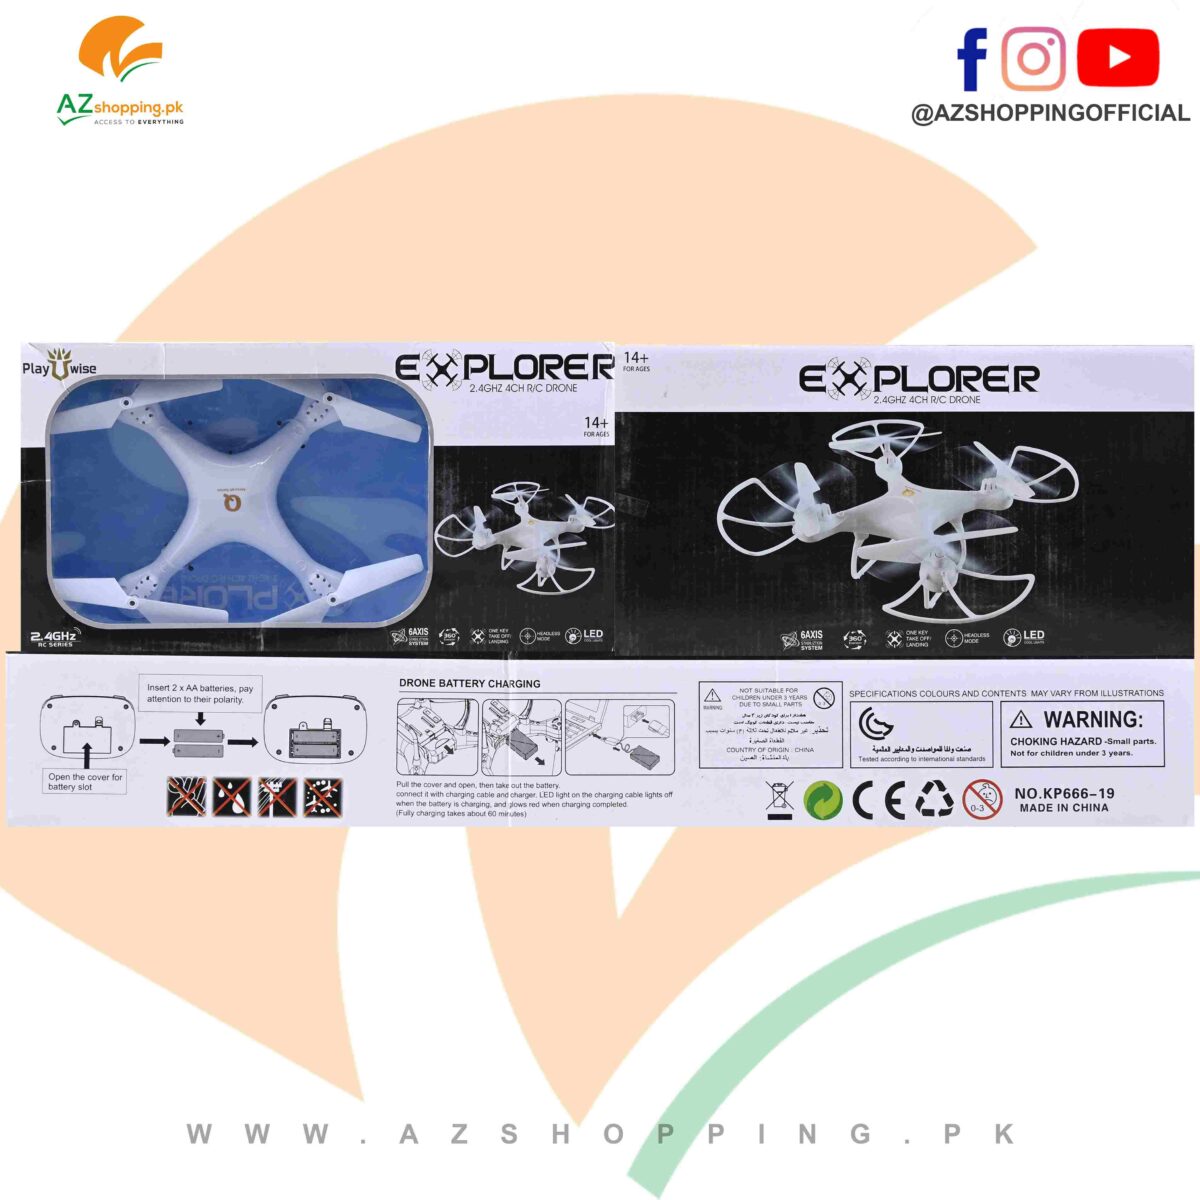 Explorers Remote Control Quadcopter Drone 360 Degree Eversion Flying – 2.4GHZ 4CH 6Axis Stabilization System with LED Lights – Model: KP666-19